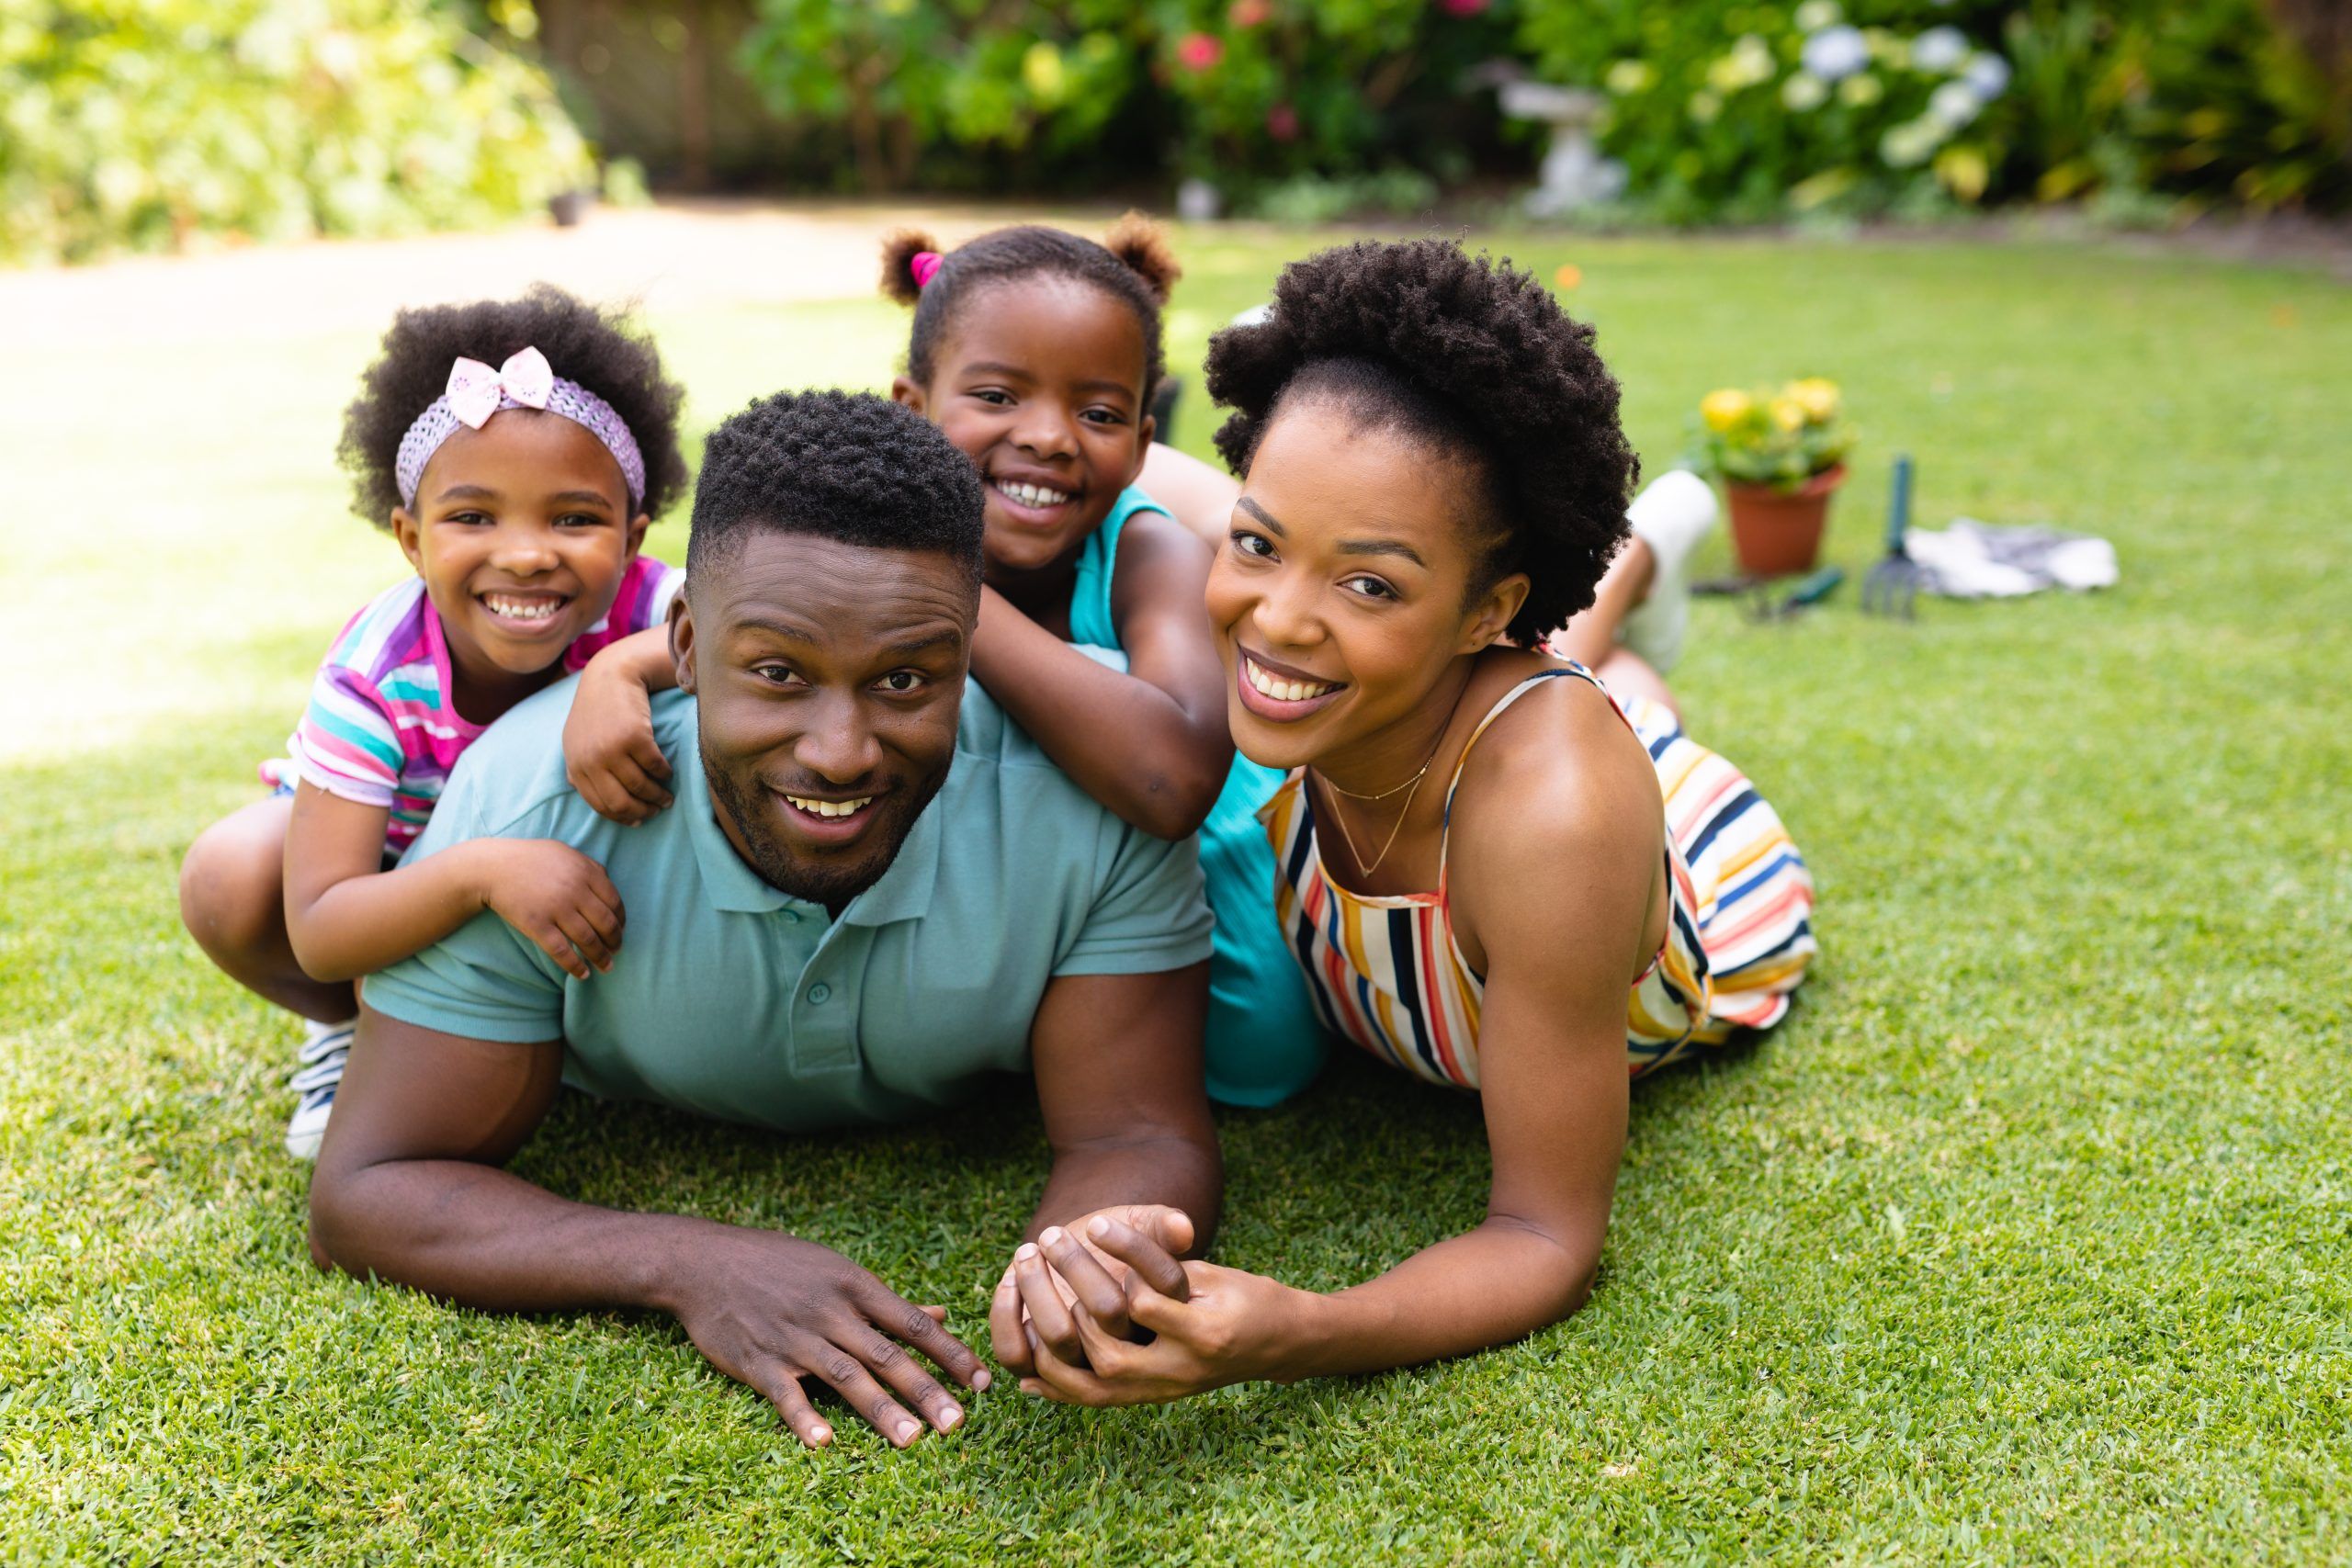 Portrait Of Smiling African American Lying Together On Lawn At Backyard Garden. Family, Love And Togetherness Concept, Unaltered.